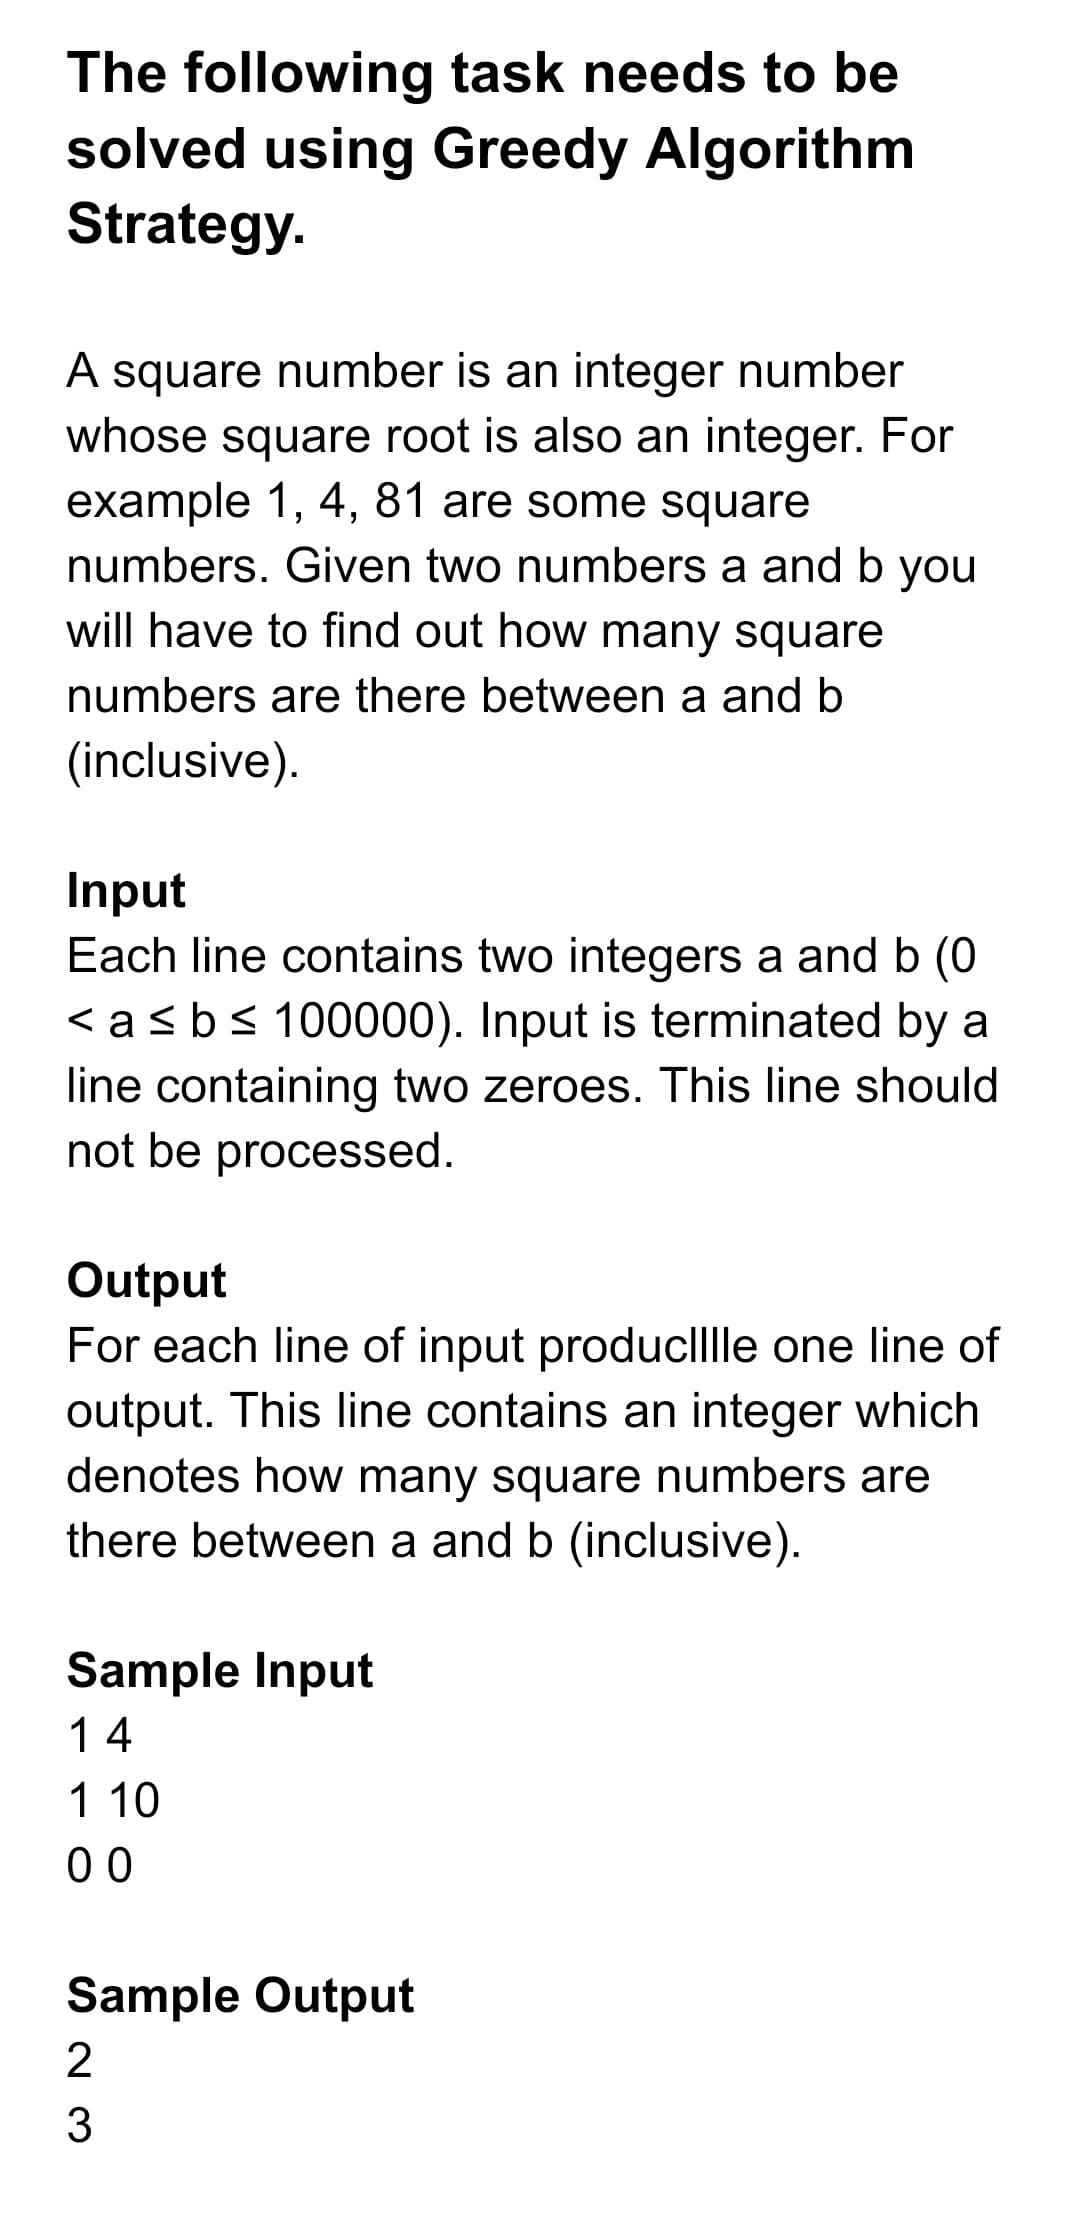 The following task needs to be
solved using Greedy Algorithm
Strategy.
A square number is an integer number
whose square root is also an integer. For
example 1, 4, 81 are some square
numbers. Given two numbers a and b you
will have to find out how many square
numbers are there between a and b
(inclusive).
Input
Each line contains two integers a and b (O
< asbs 100000). Input is terminated by a
line containing two zeroes. This line should
not be processed.
Output
For each line of input produclllle one line of
output. This line contains an integer which
denotes how many square numbers are
there between a and b (inclusive).
Sample Input
14
1 10
00
Sample Output
2
